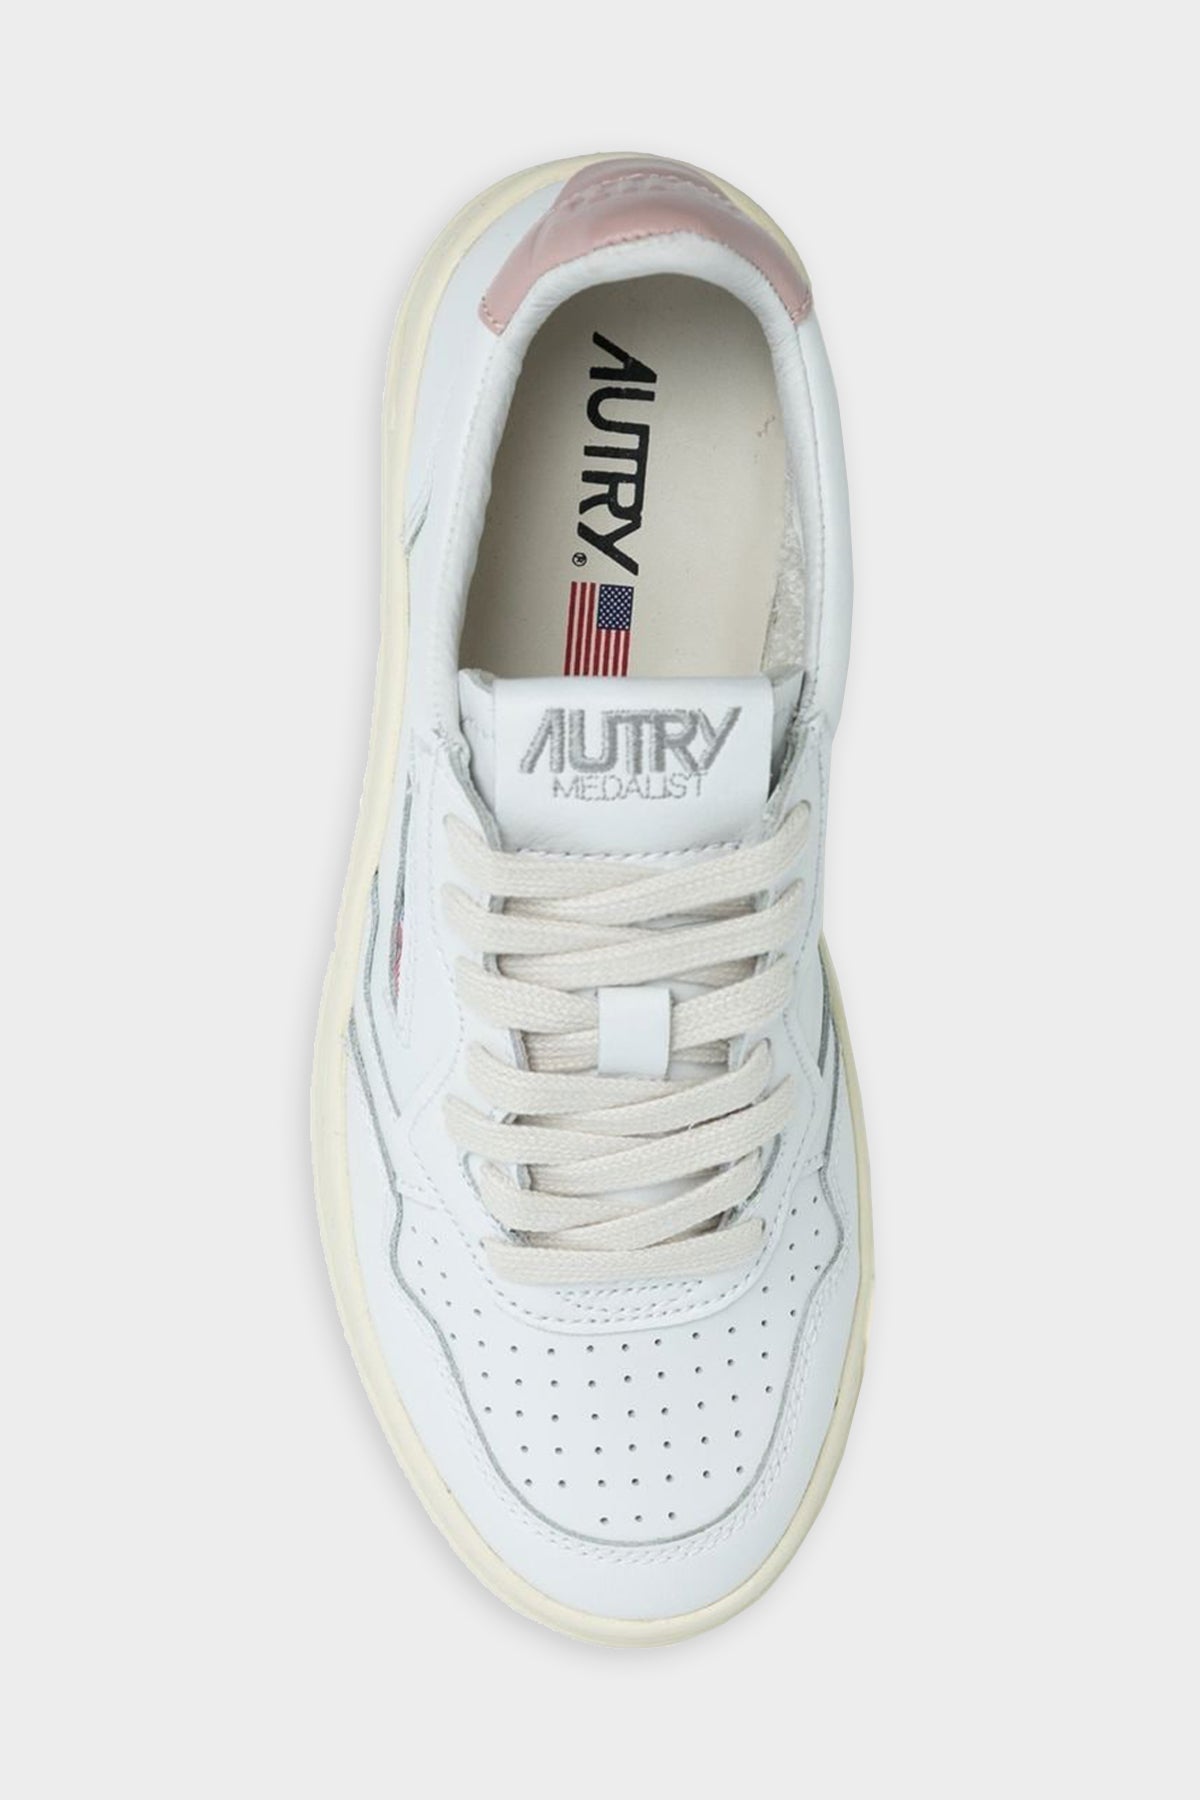 Medalist Low Leather Sneaker in White Pink - shop-olivia.com